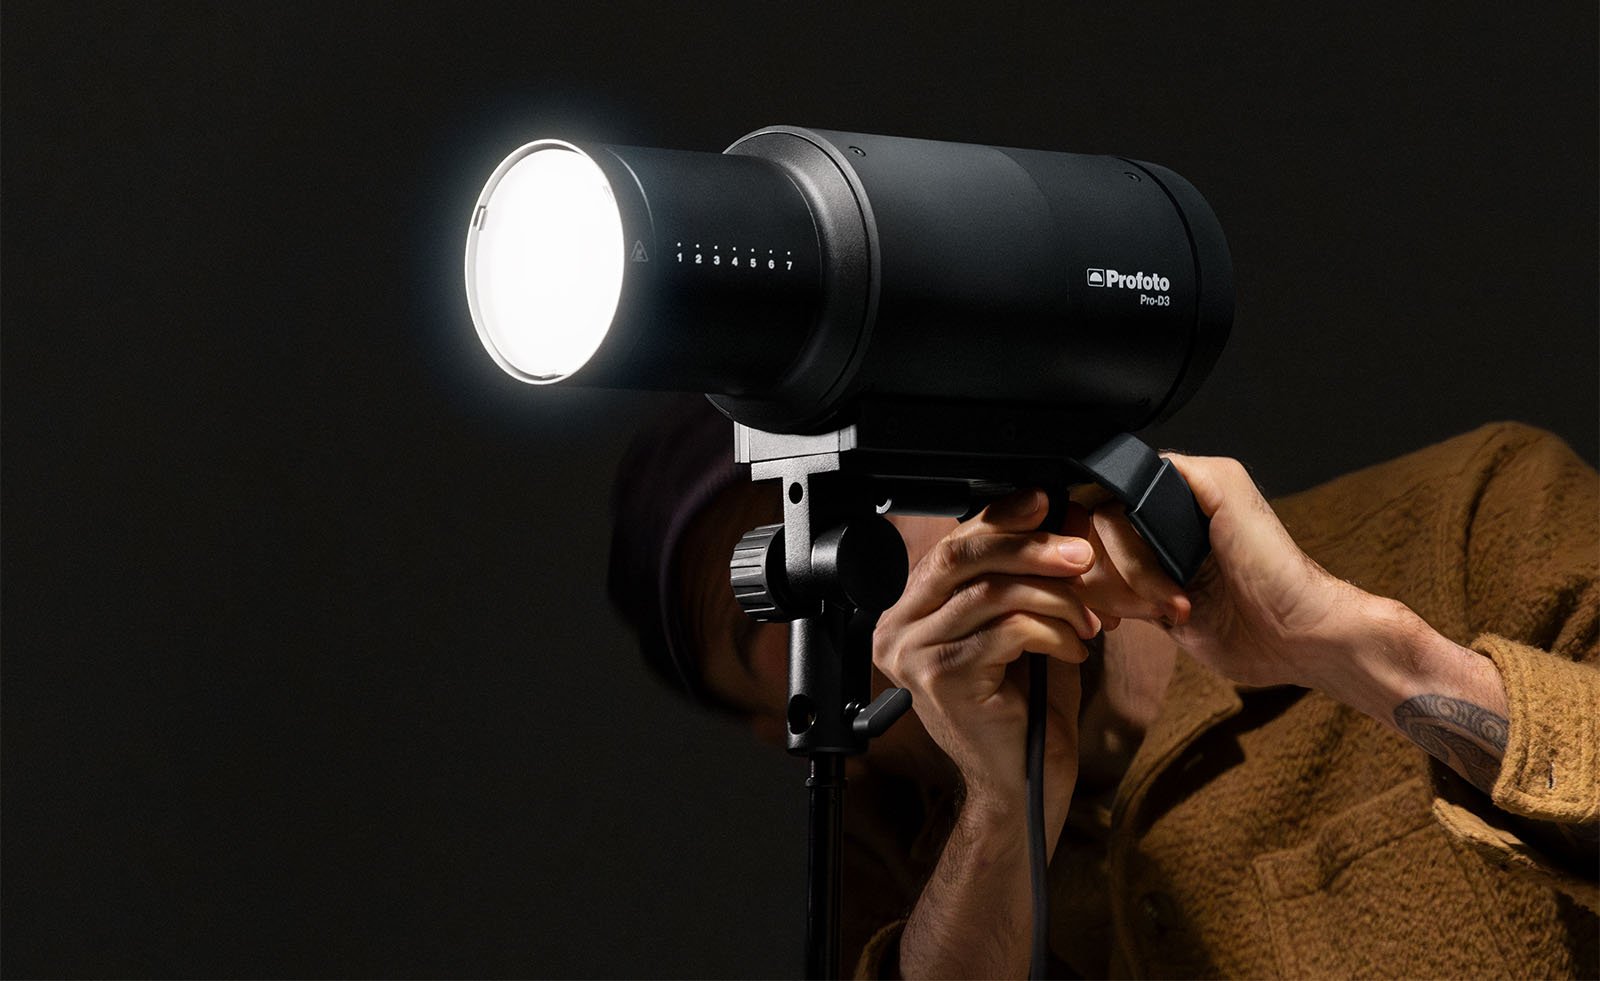 A person adjusts a large profoto pro-11 studio flash mounted on a stand against a dark background, focusing the device with their hands.